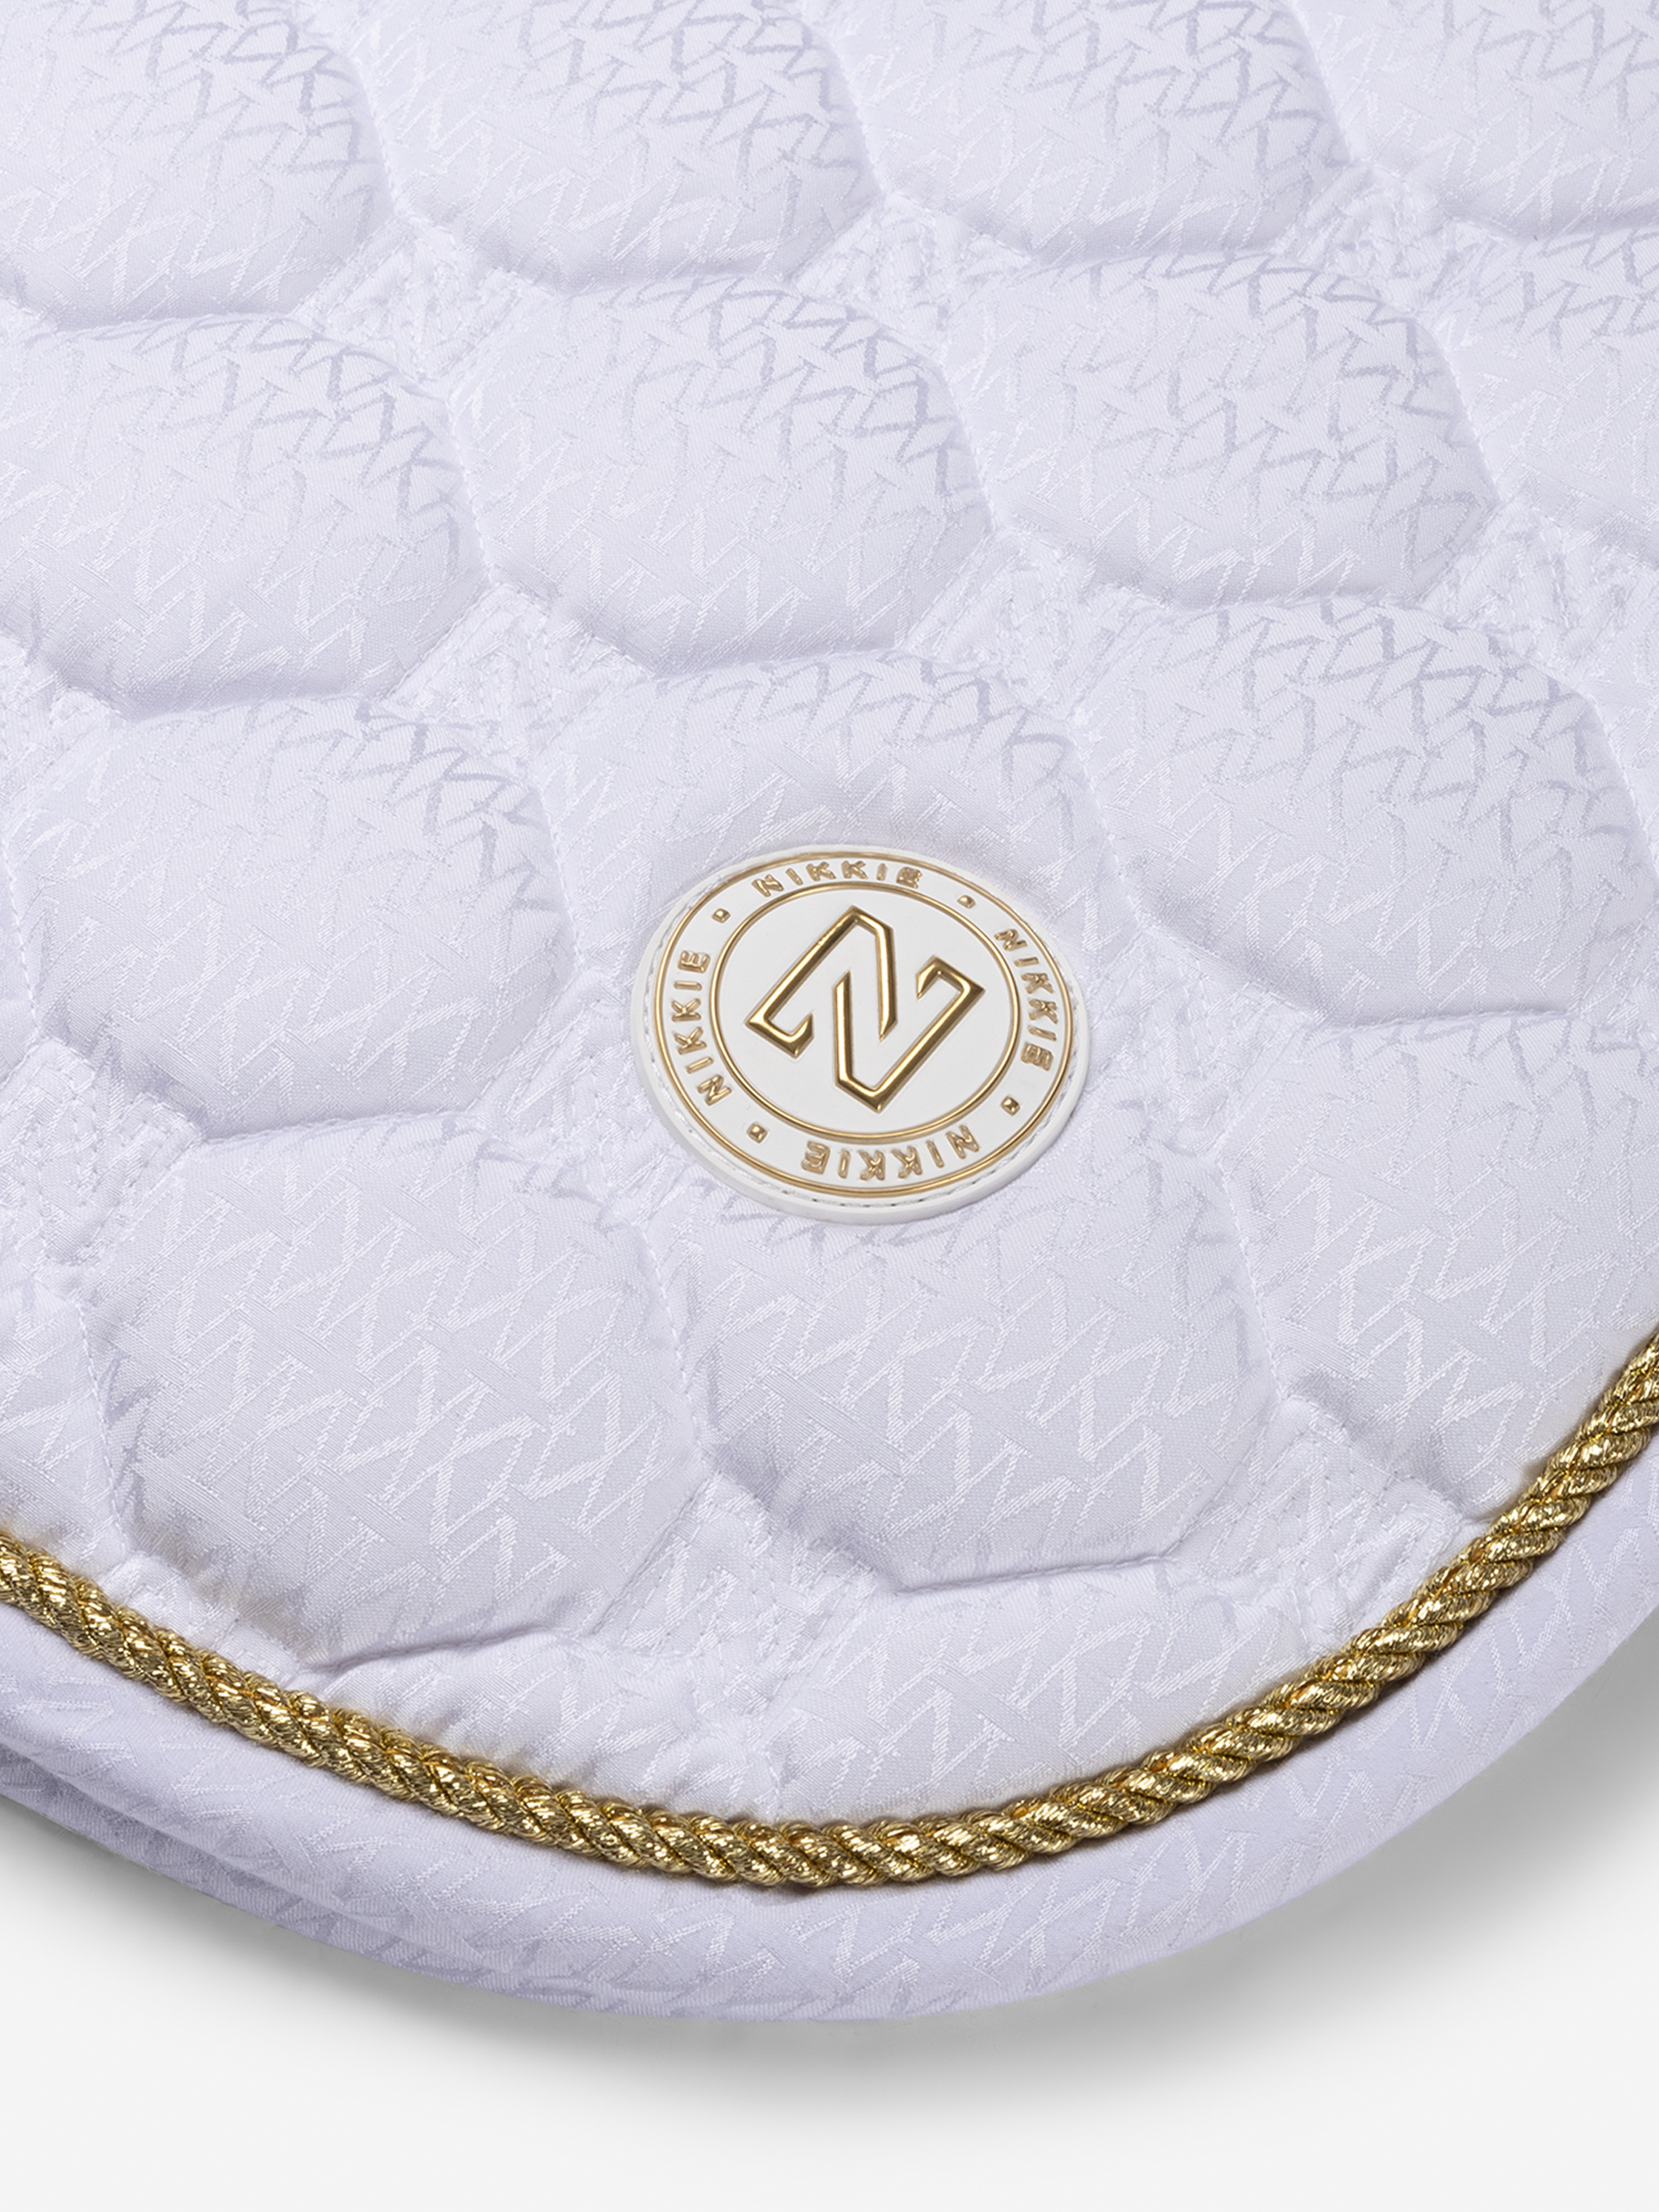 Saddle pad with details